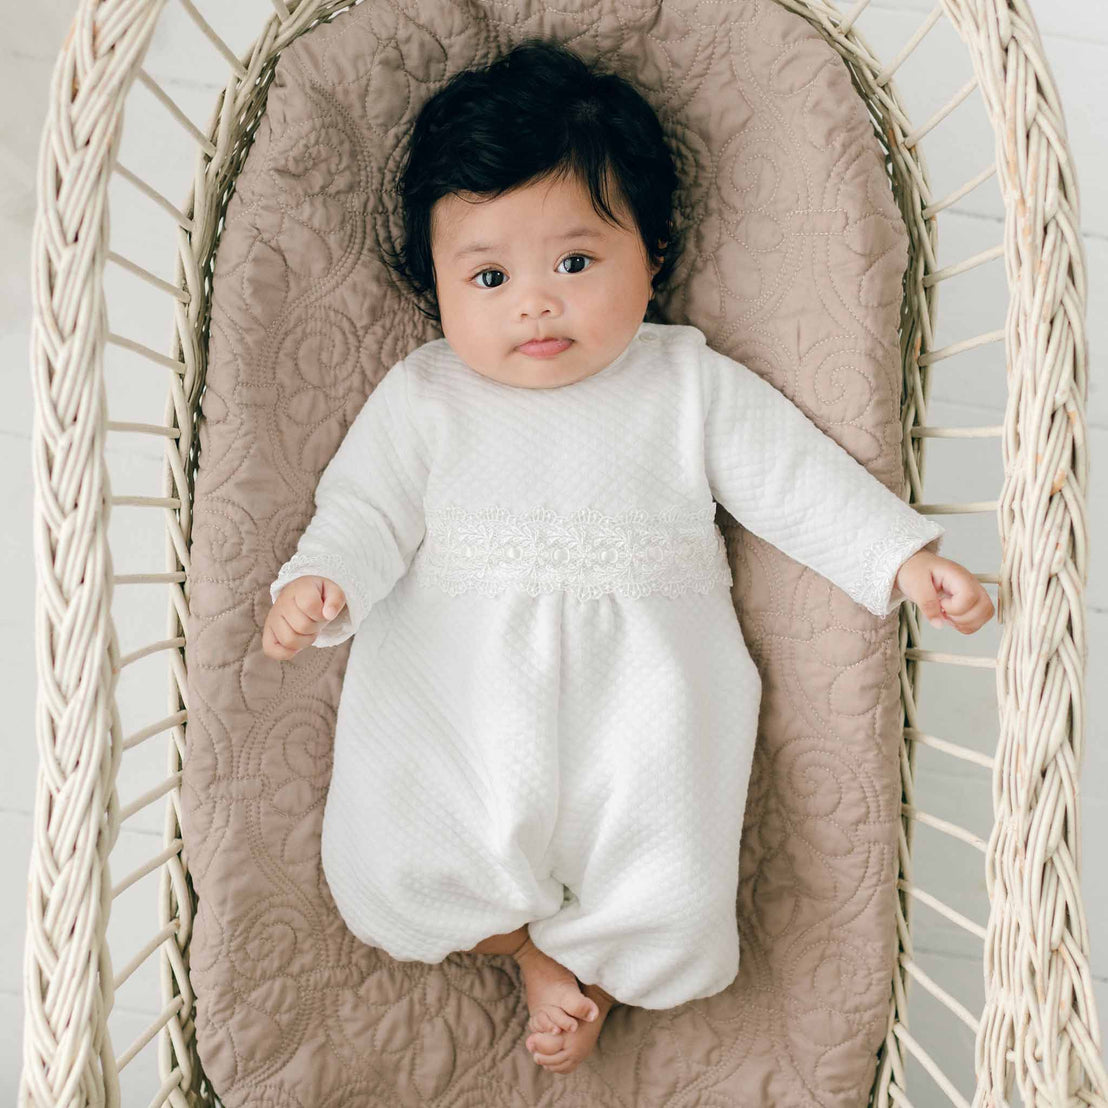 A baby with dark hair lies on their back in a wicker bassinet. The baby is wearing a white, long-sleeved, textured Madeline Quilted Newborn Romper with lace detailing across the chest. The bassinet has a quilted cotton beige mattress, all thoughtfully handmade in the USA. The baby looks up with a neutral expression.